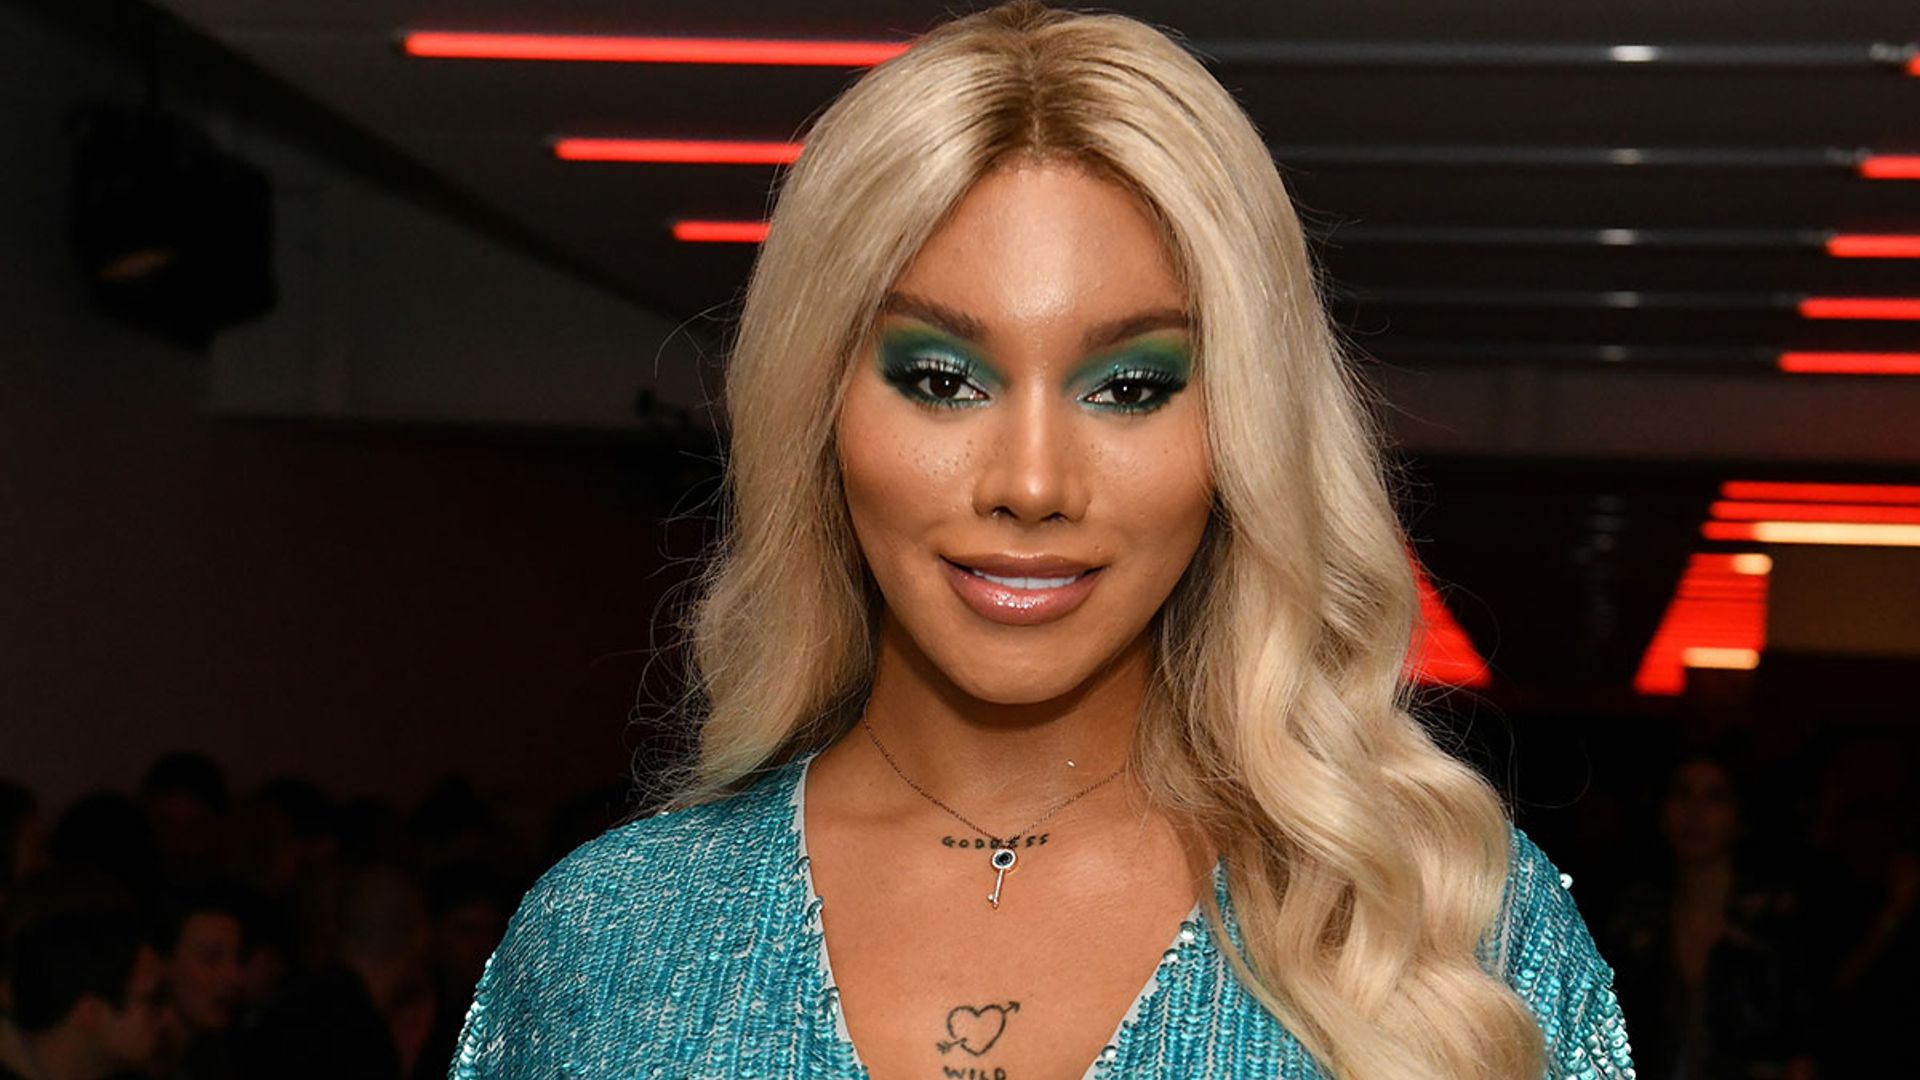 Munroe Bergdorf to join L’Oréal Paris's Diversity board: 'I look forward to new beginnings'